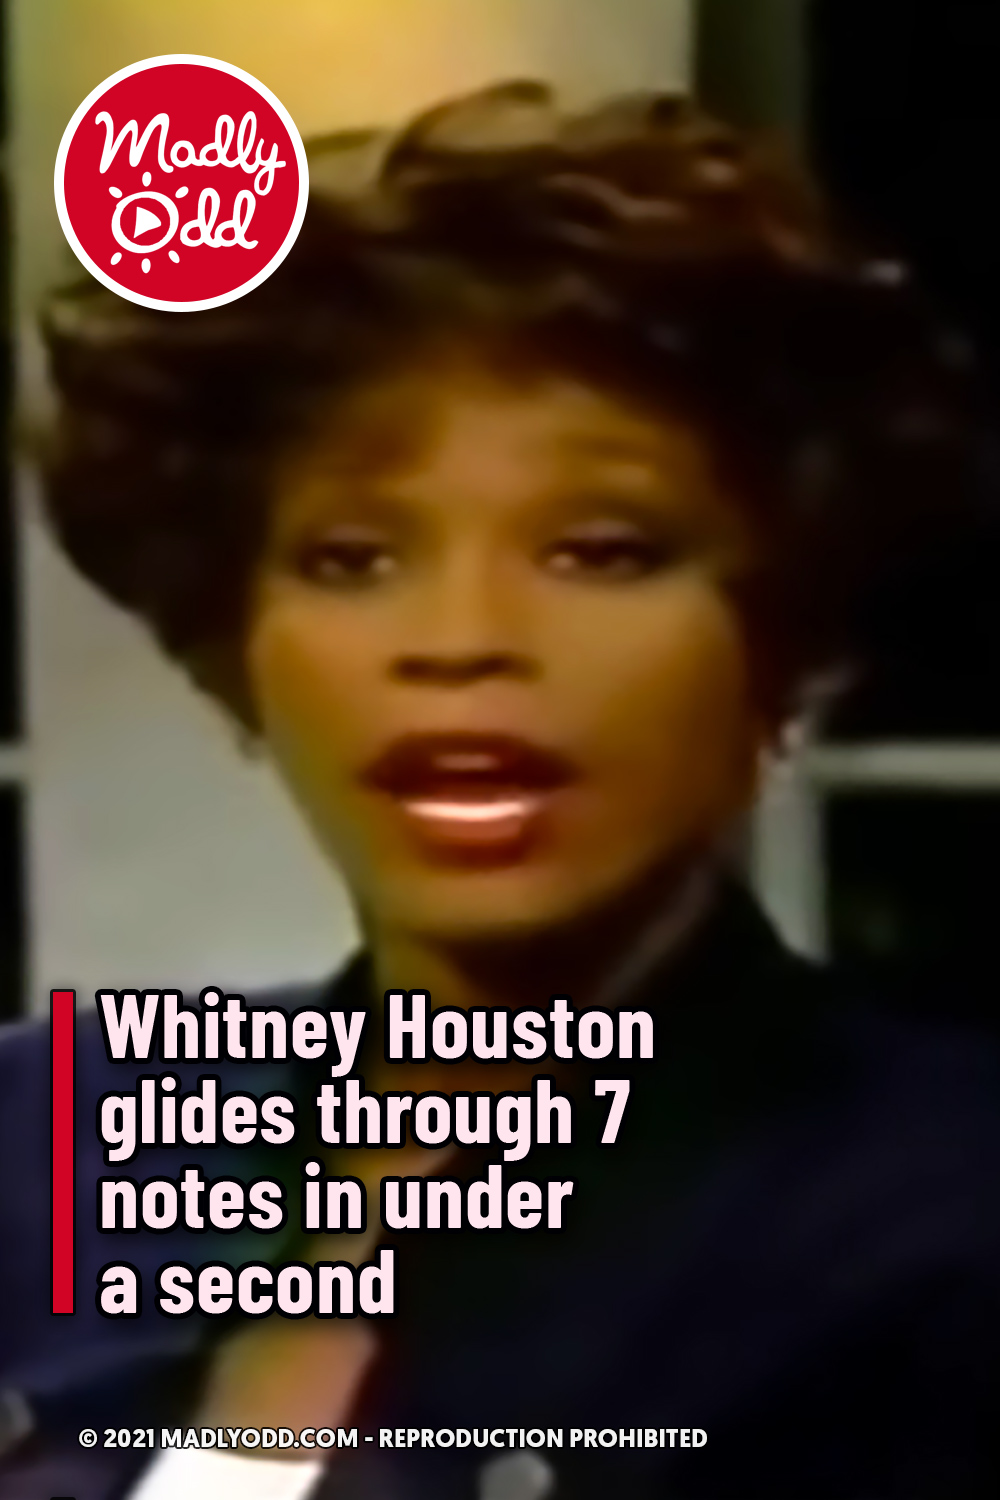 Whitney Houston glides through 7 notes in under a second